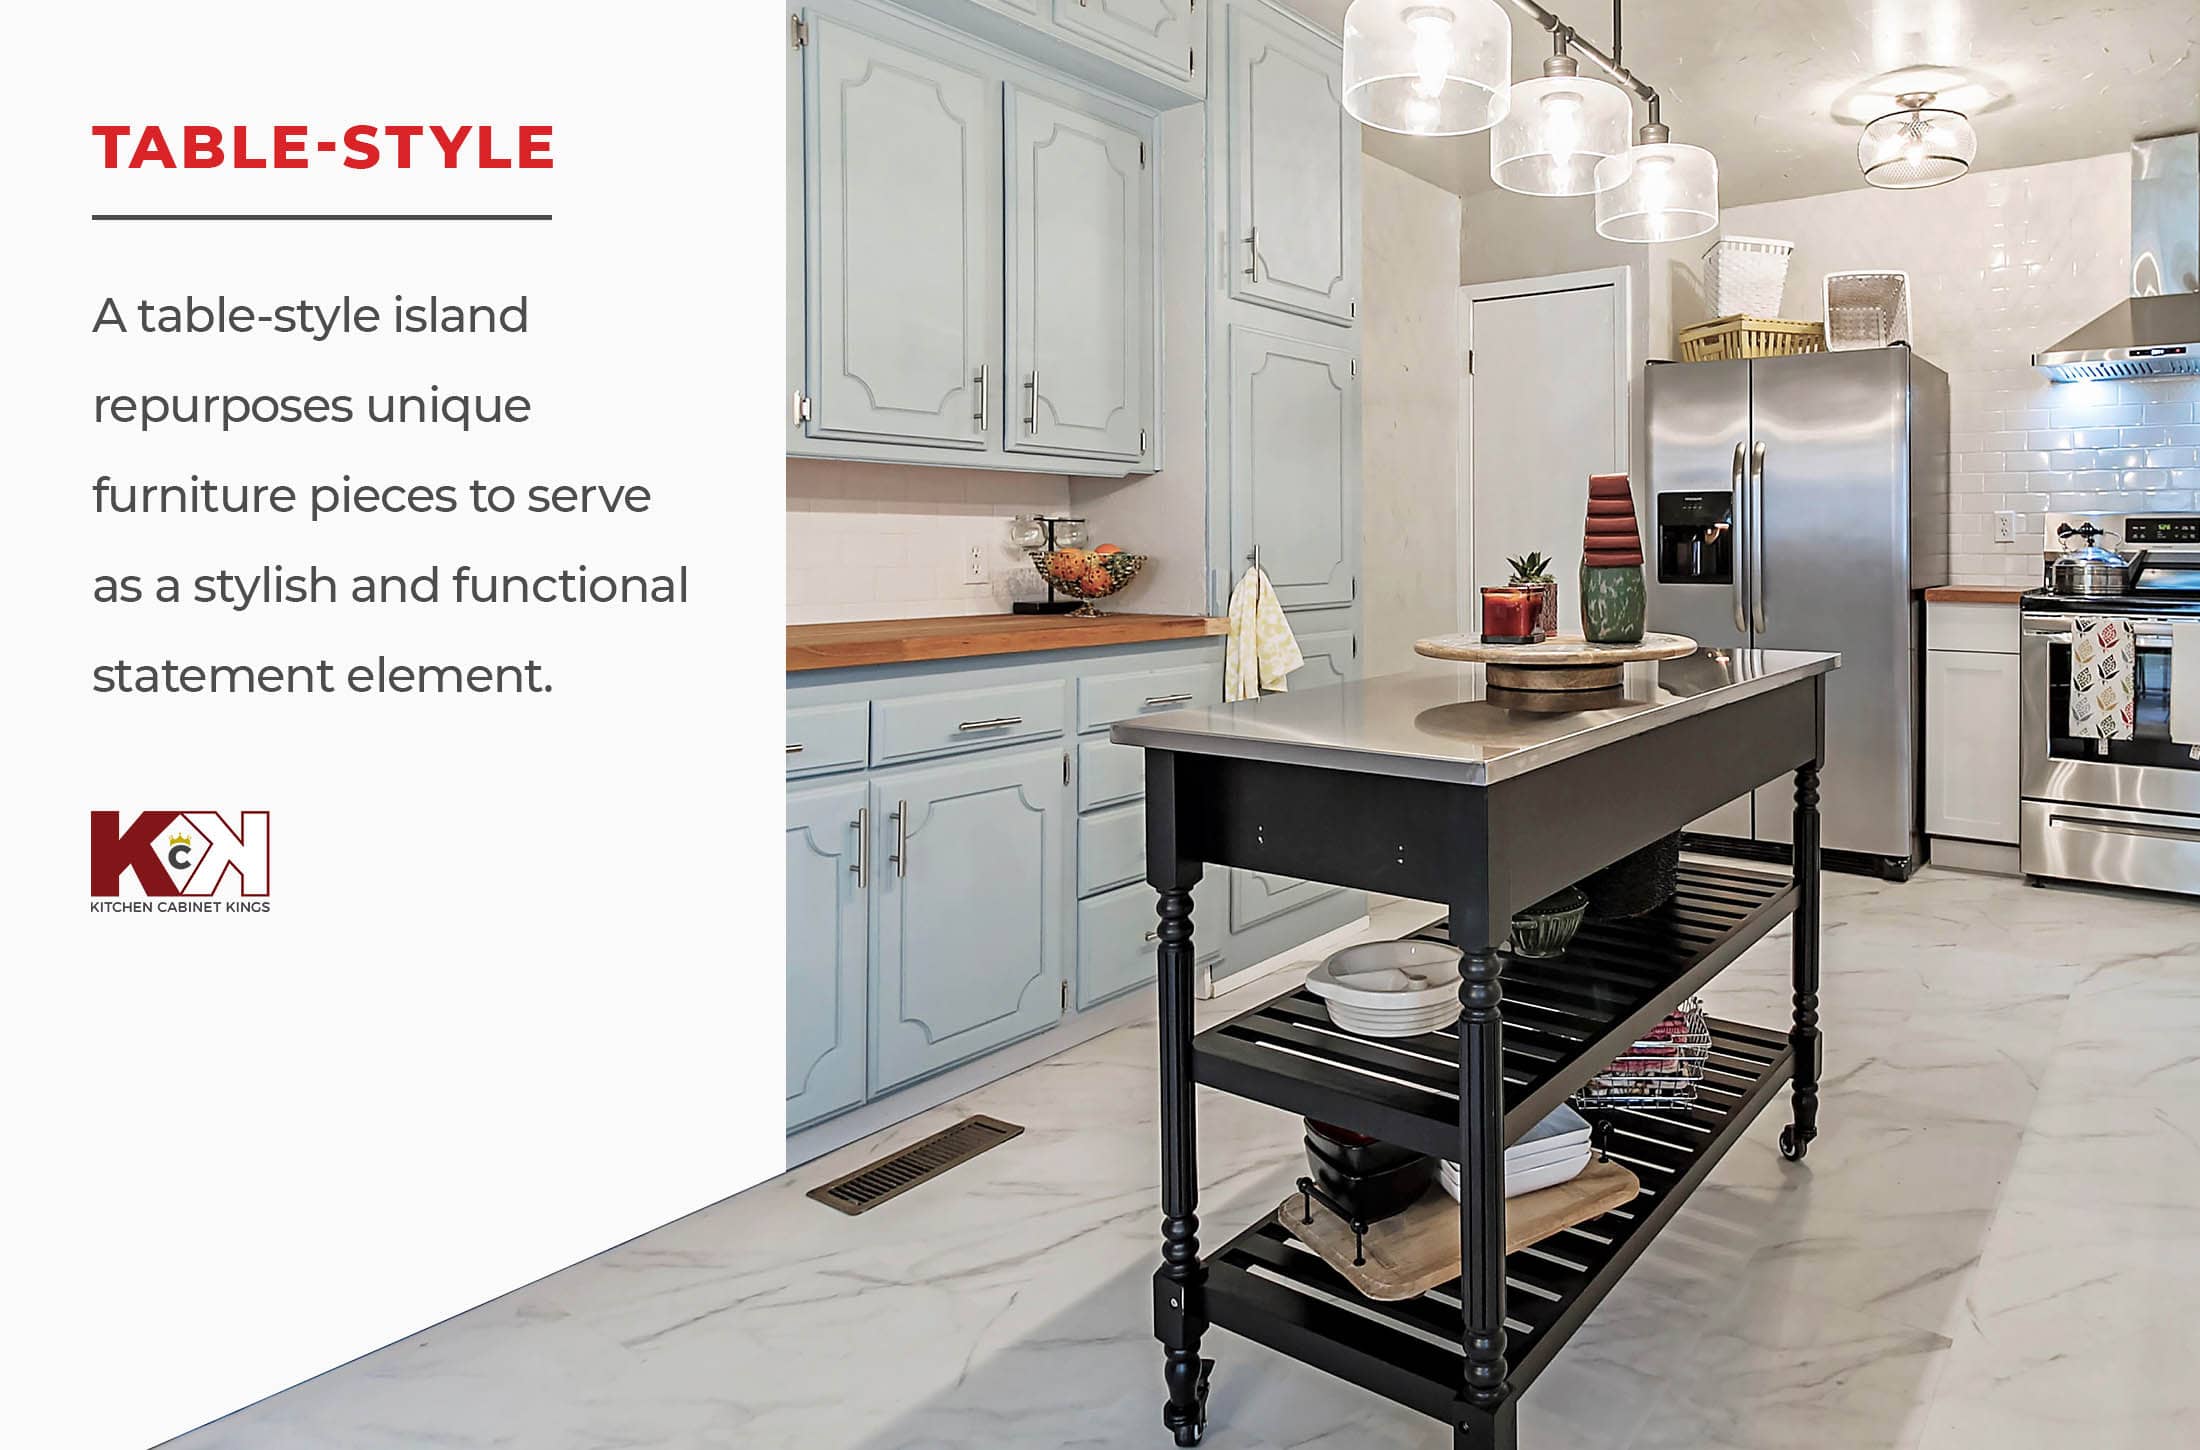 image and definition of table-style kitchen island.